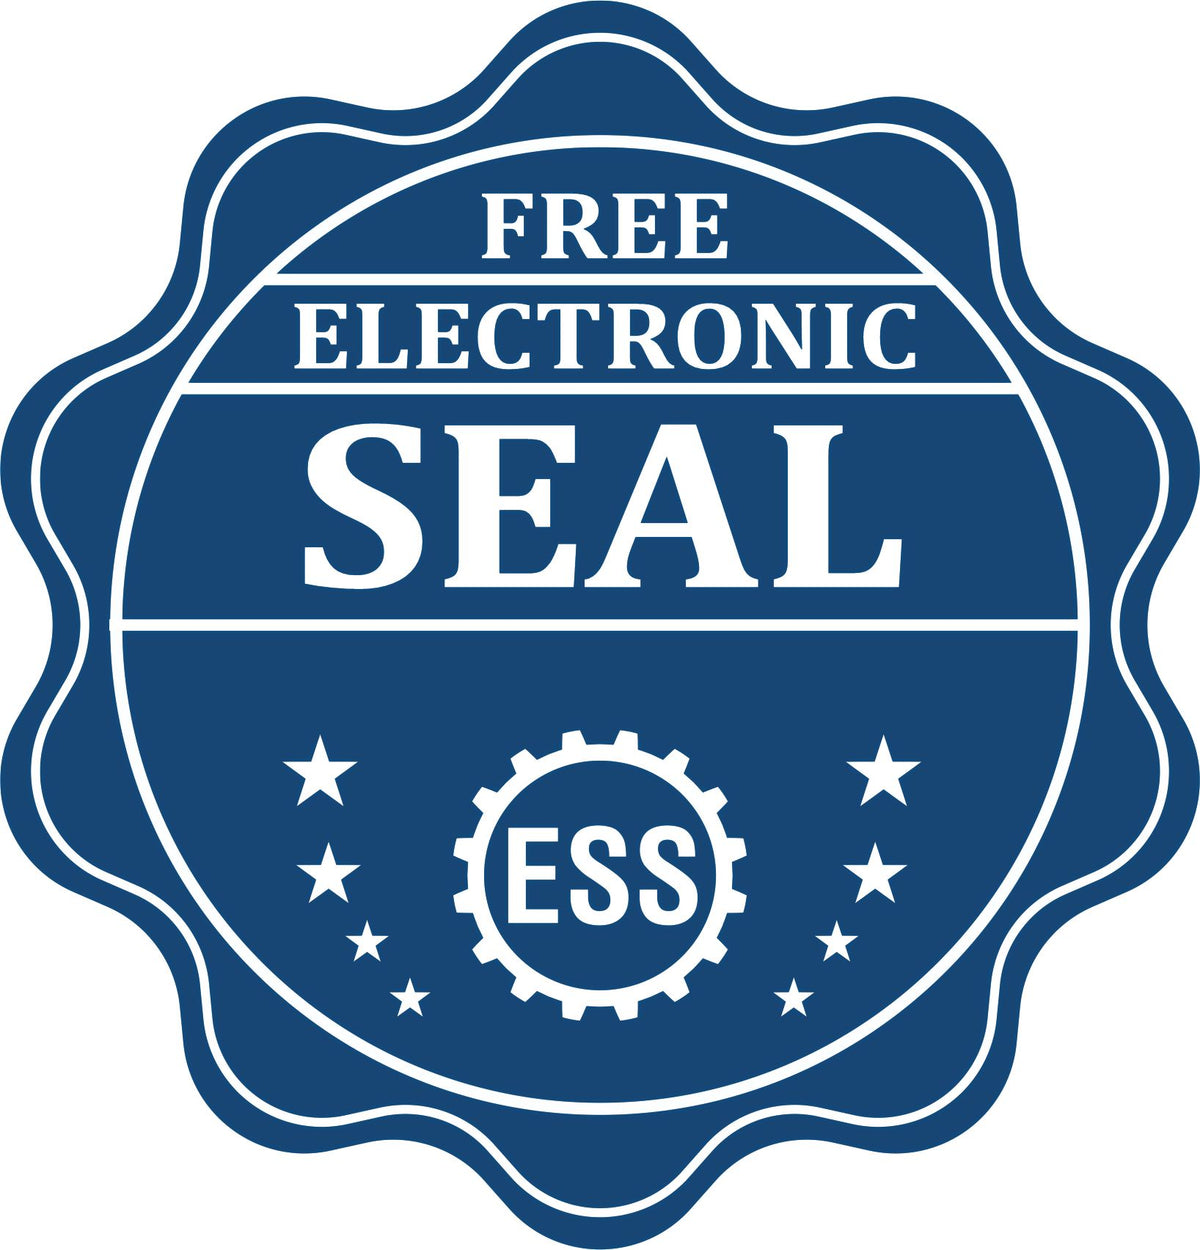 A badge showing a free electronic seal for the State of Alabama Extended Long Reach Engineer Seal with stars and the ESS gear on the emblem.